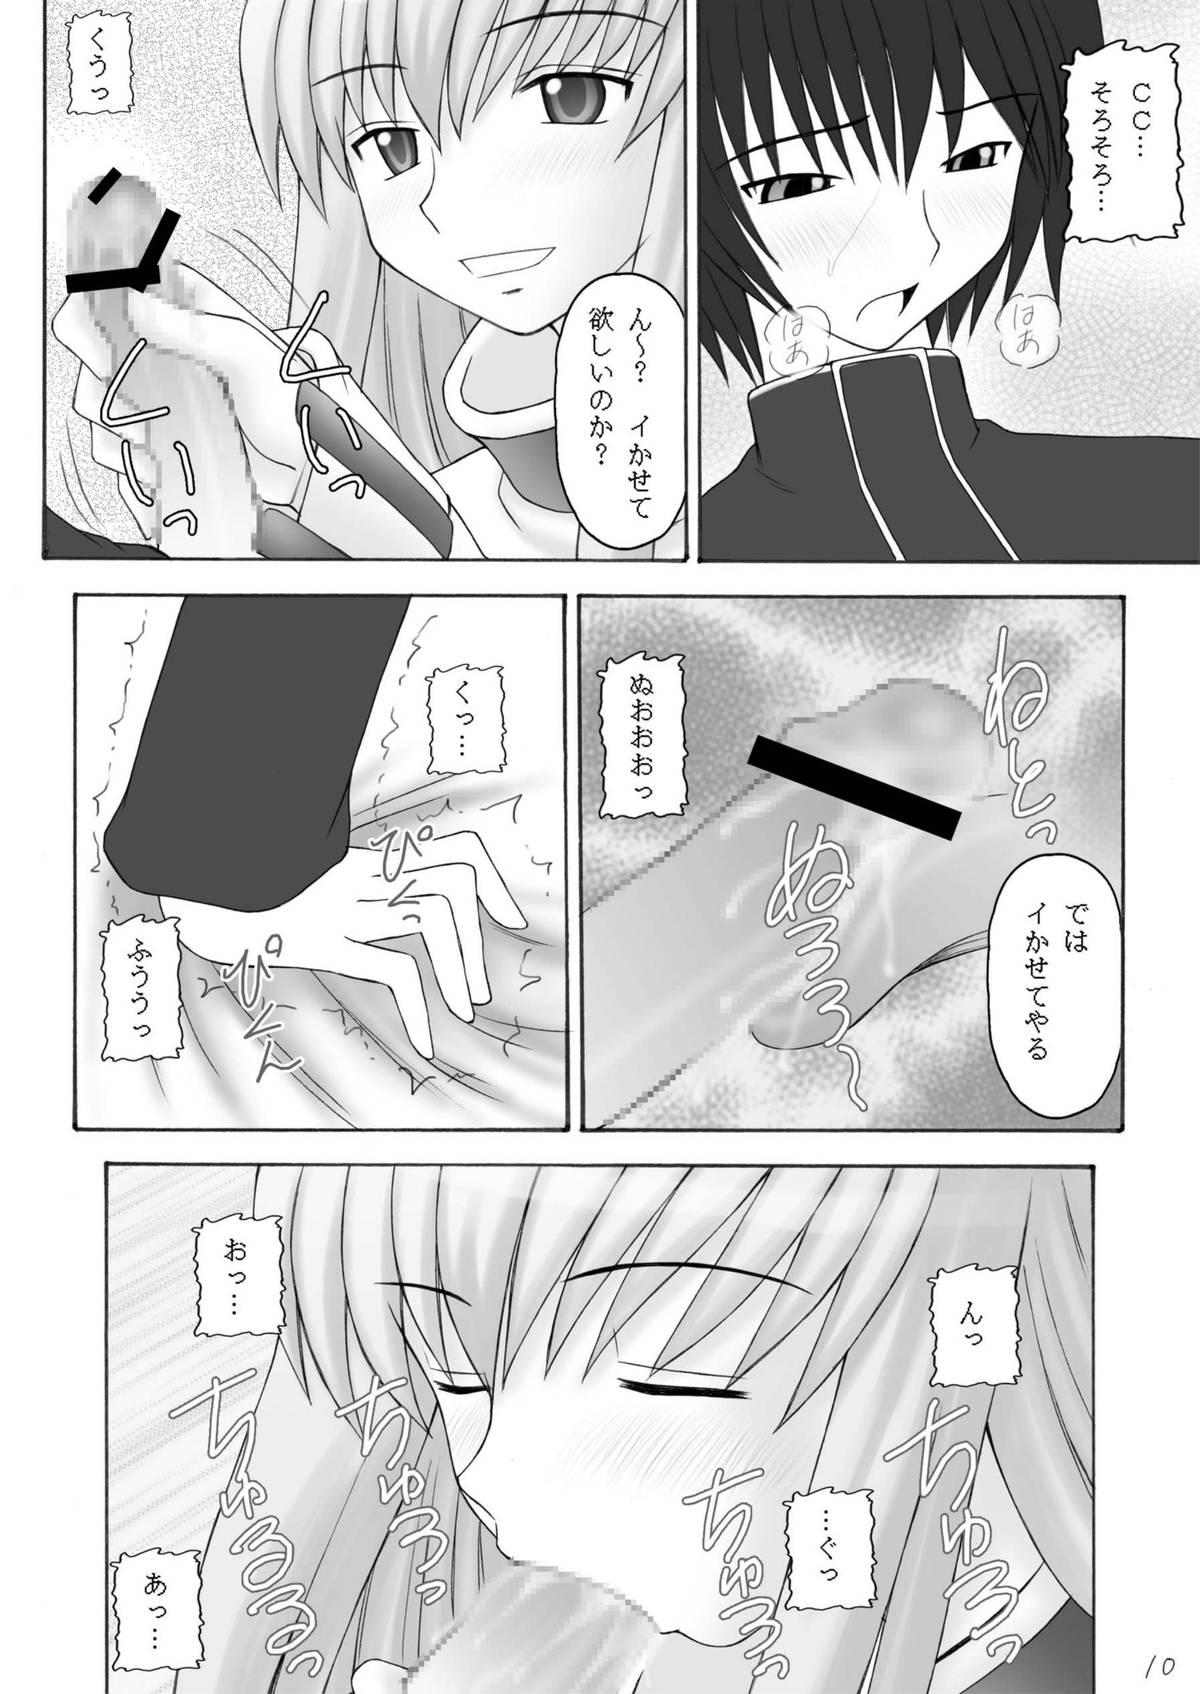 Naturaltits C×2 - Code geass Sislovesme - Page 10